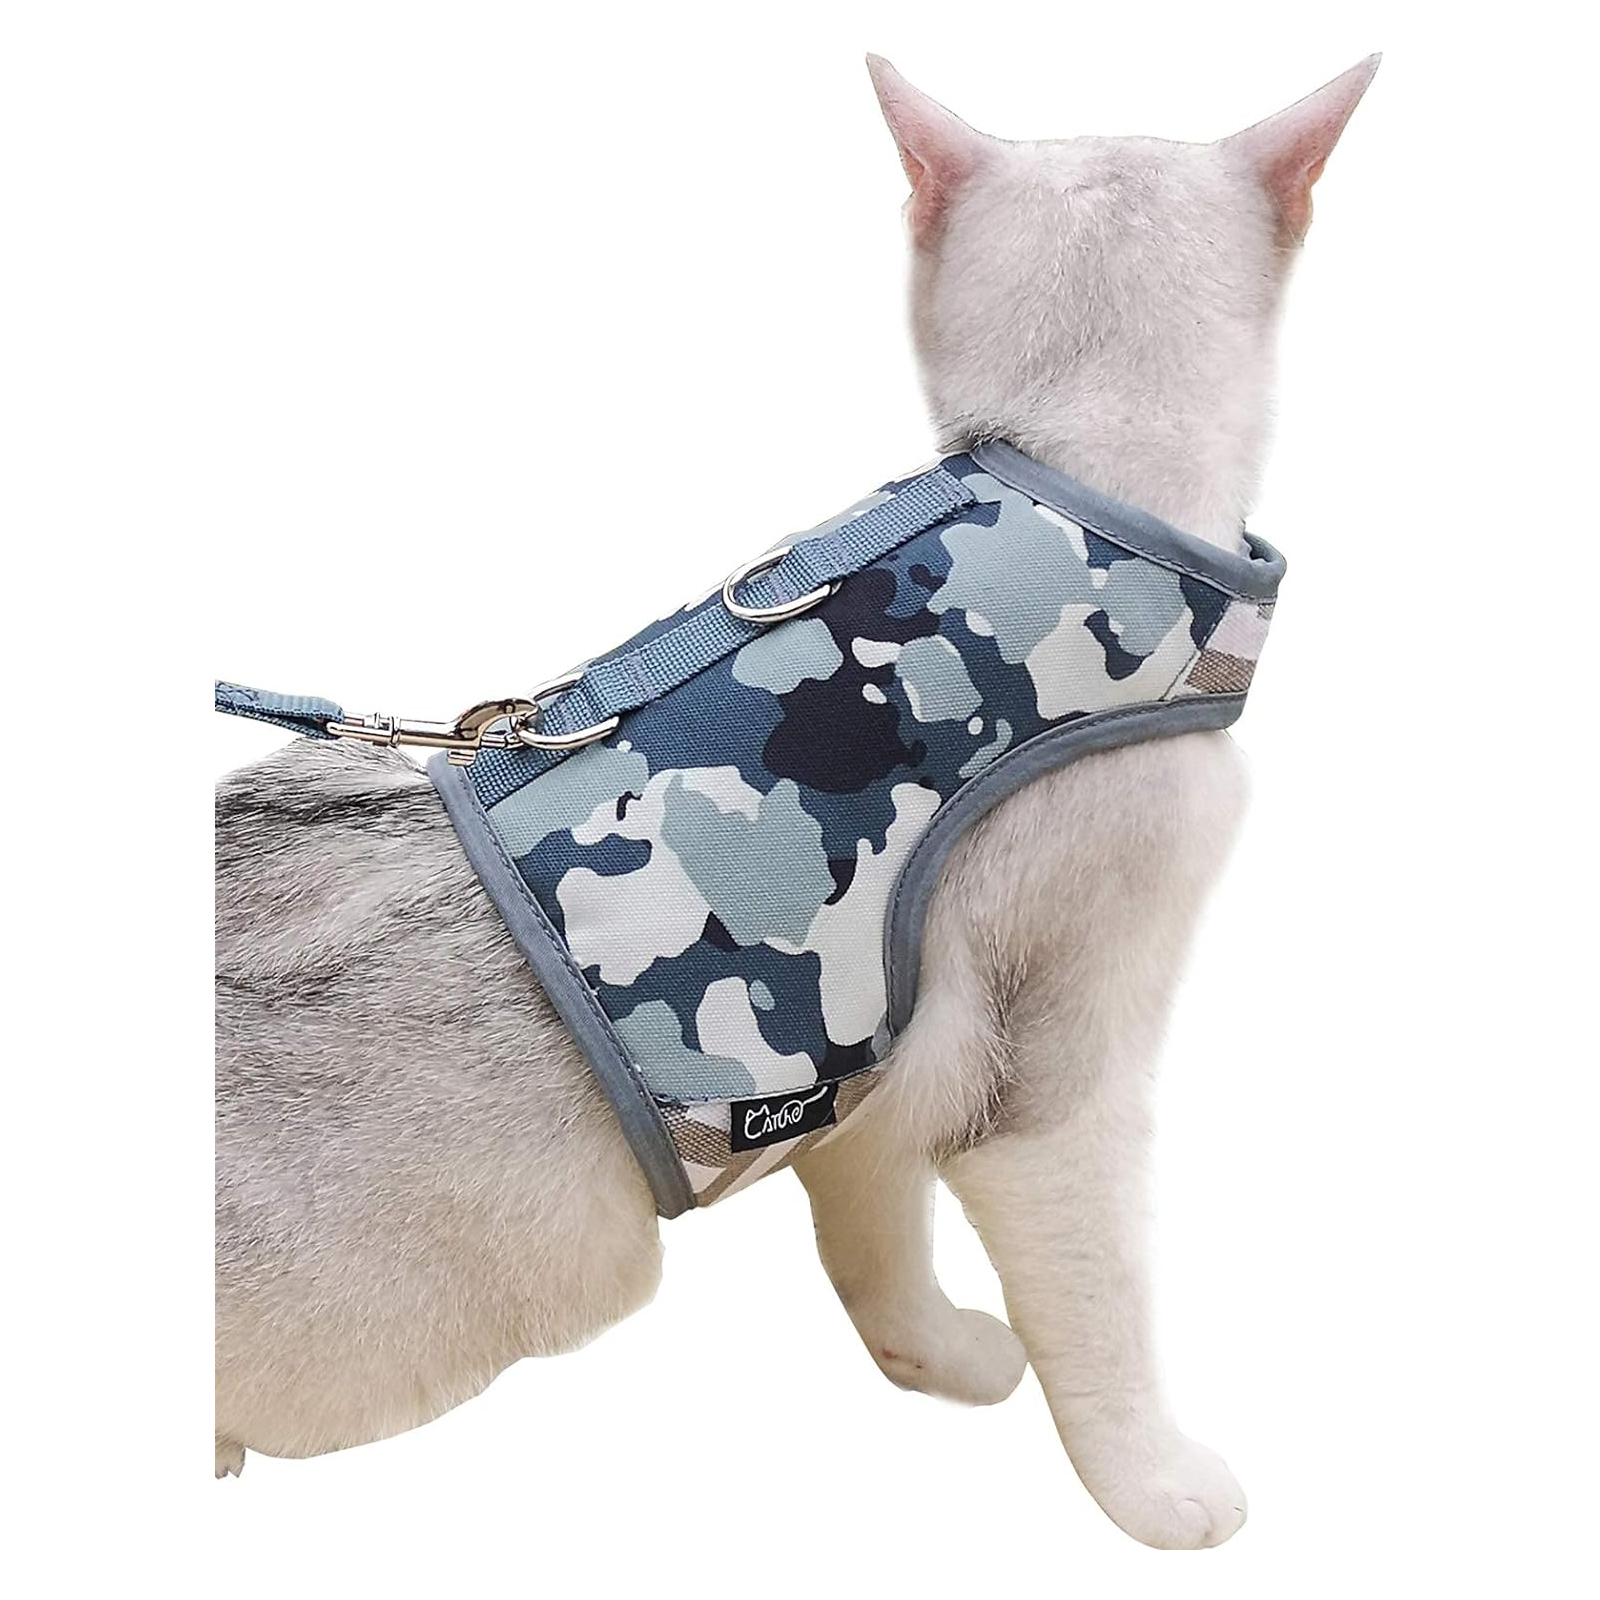 Tactical Kitty Harness and Leash